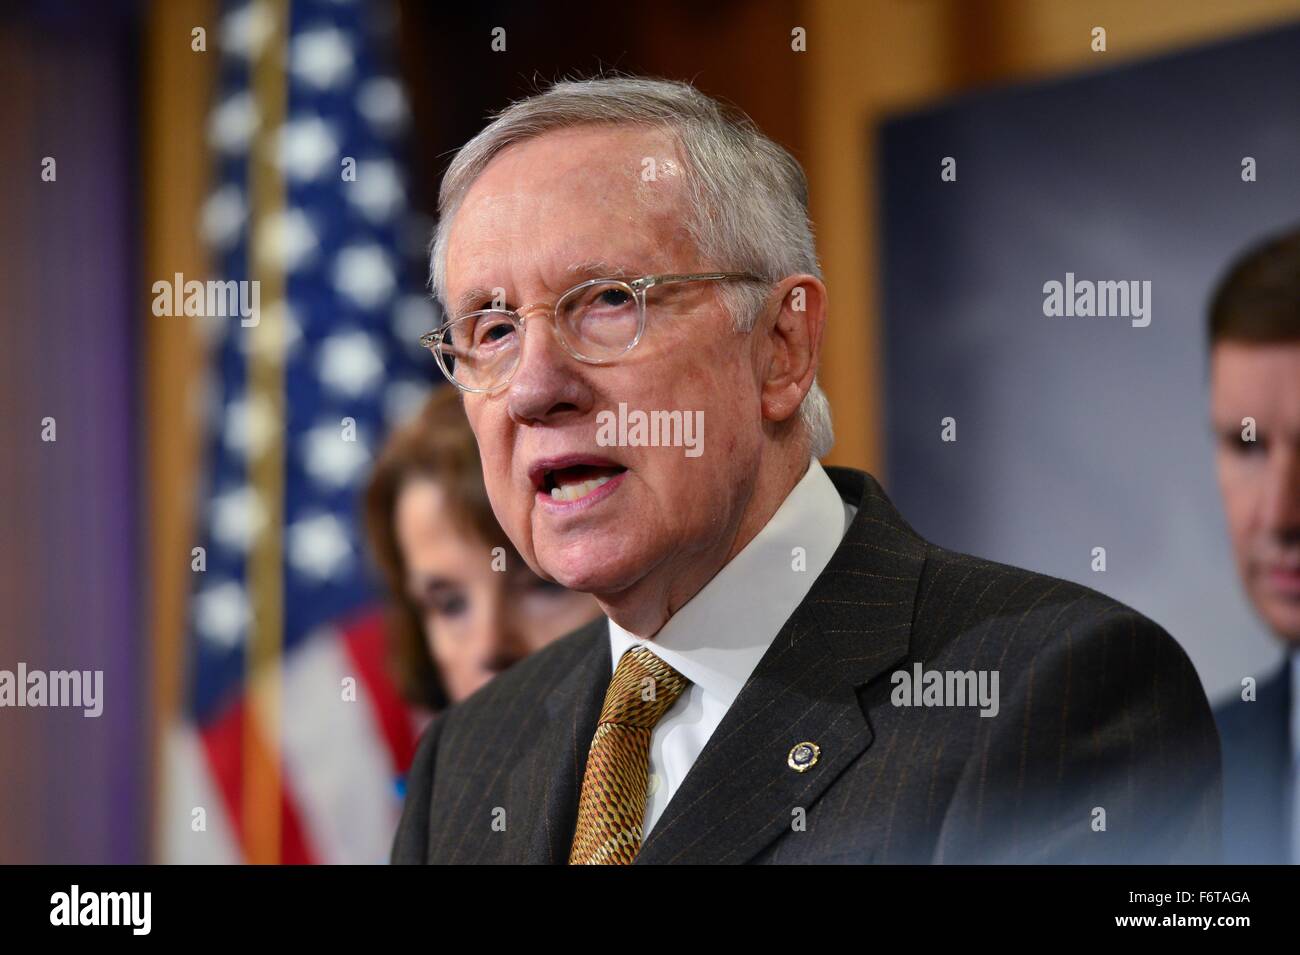 Washington DC, USA. 19th November, 2015. U.S. Senator Minority leader Harry Reid joined by other Democrats discusses their opposition to tighter restrictions on Syrian refugees coming to the U.S. during a press conference on Capitol Hill November 19, 2015 in Washington, DC.  Earlier the Republican controlled House passed a bill halting Syrian refugees until they undergo a more stringent vetting process following the Paris attacks. Credit:  Planetpix/Alamy Live News Stock Photo